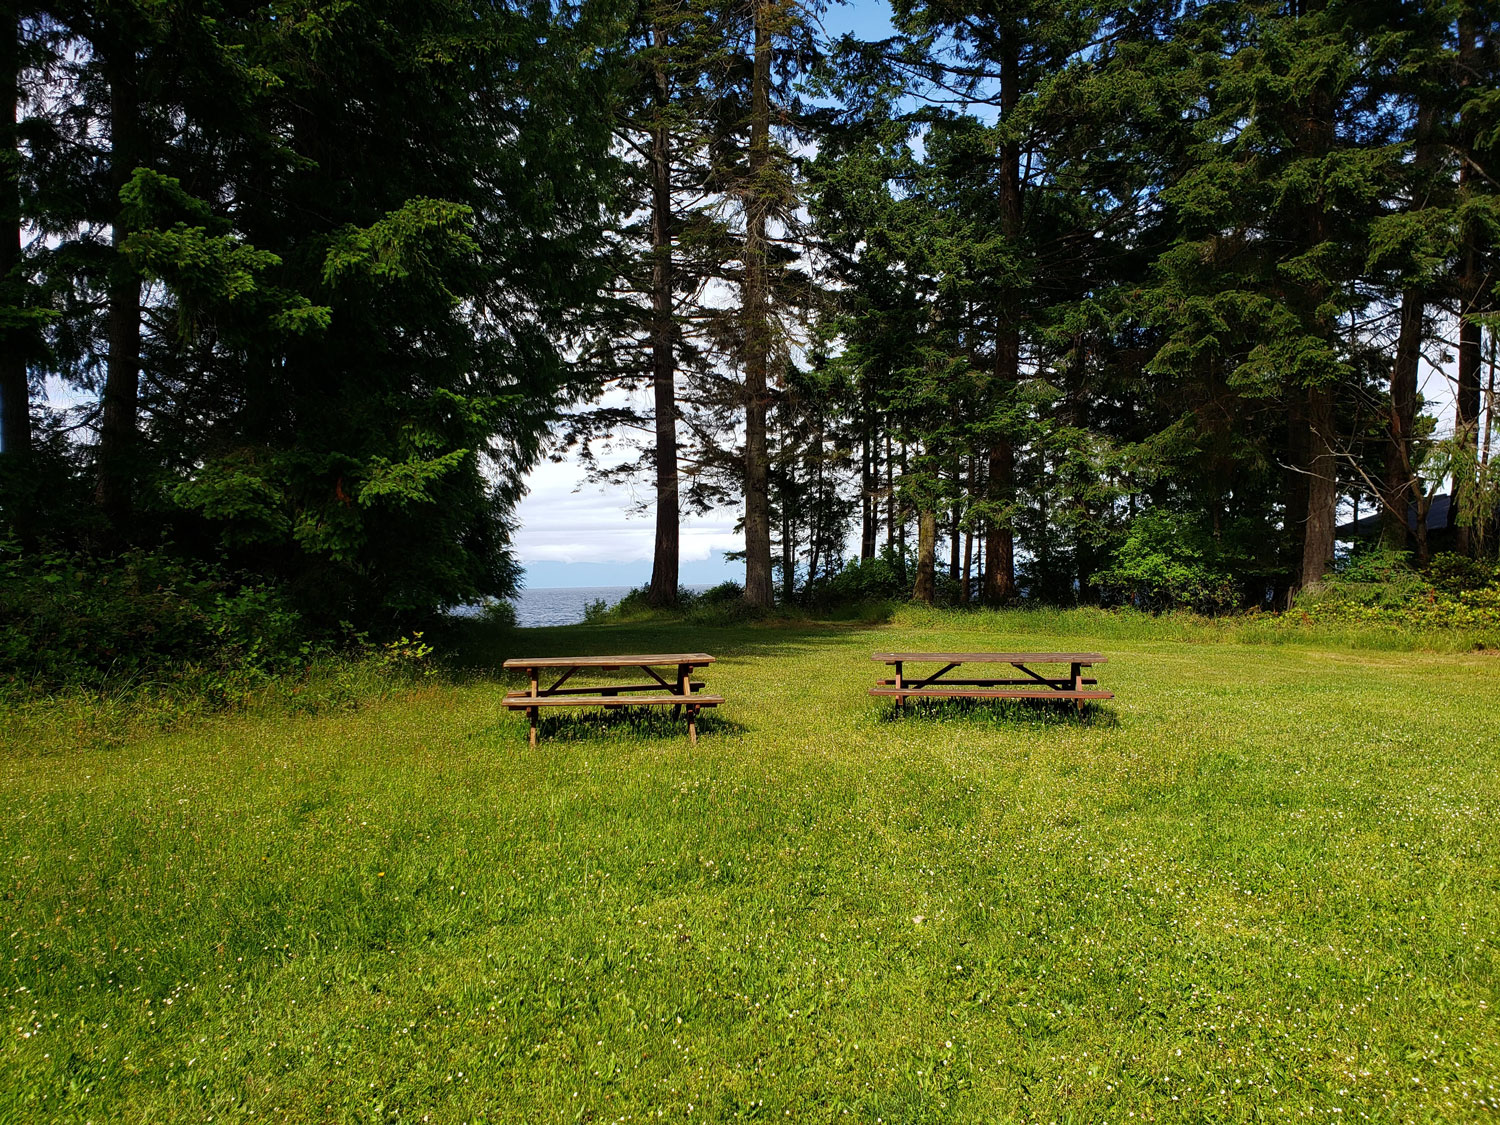 Picnic tables on grassy meadow at Blue Heron Community Park.